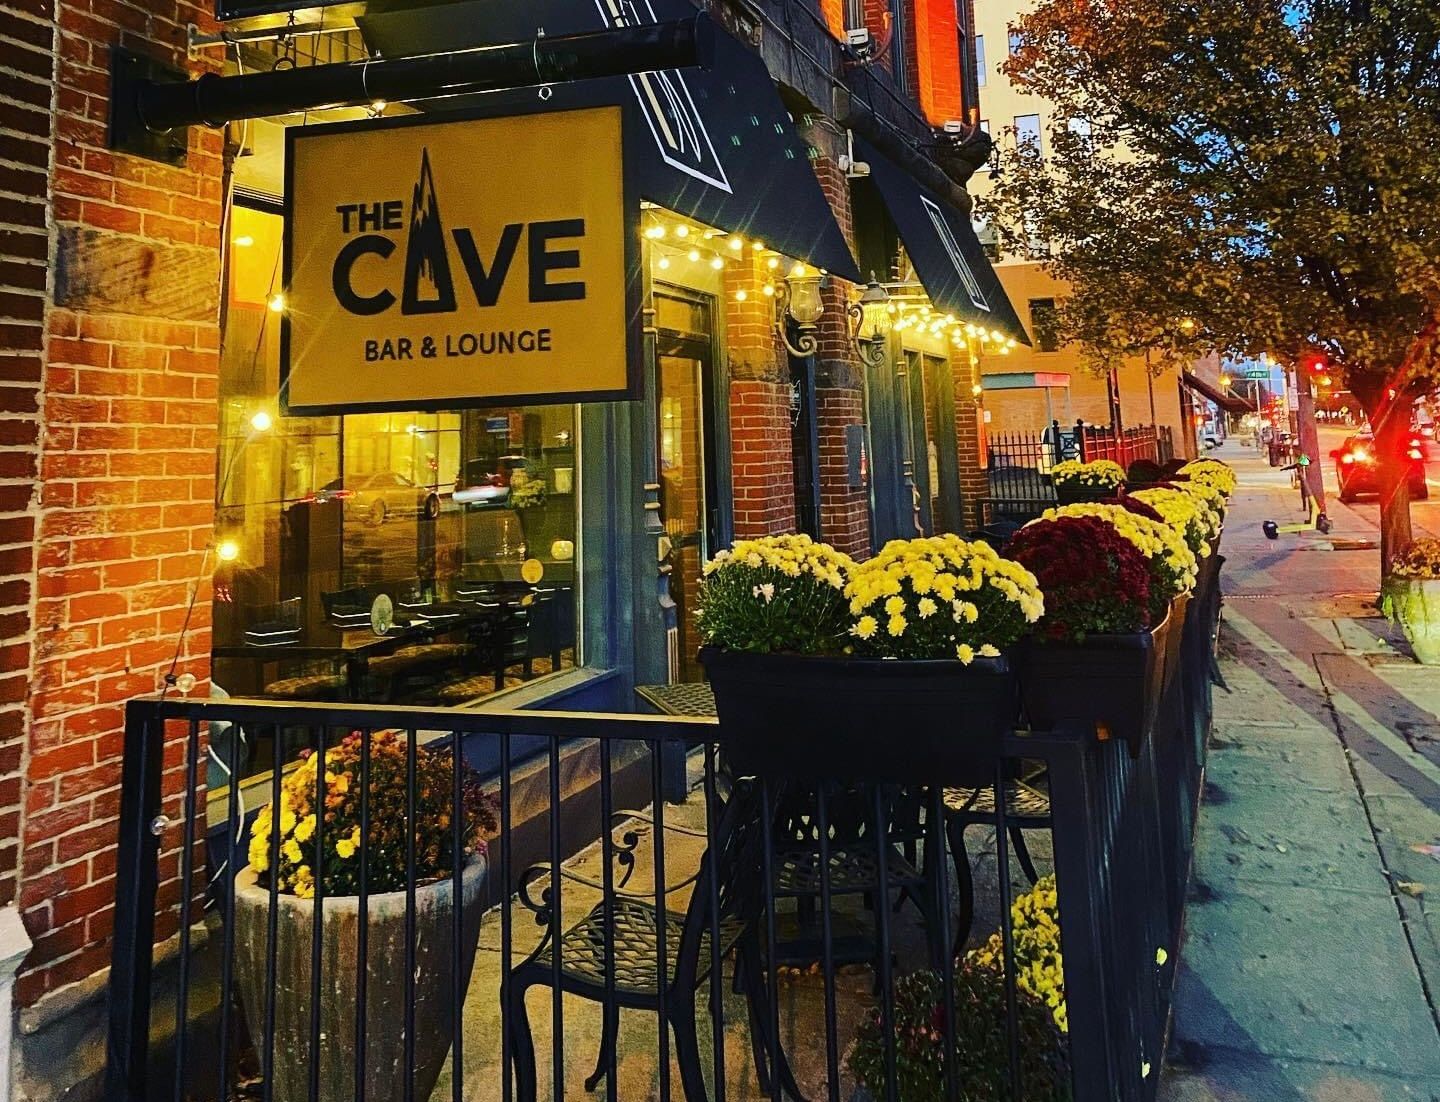 South American-inspired with a Spanish Twist - The Cave Bar & Lounge